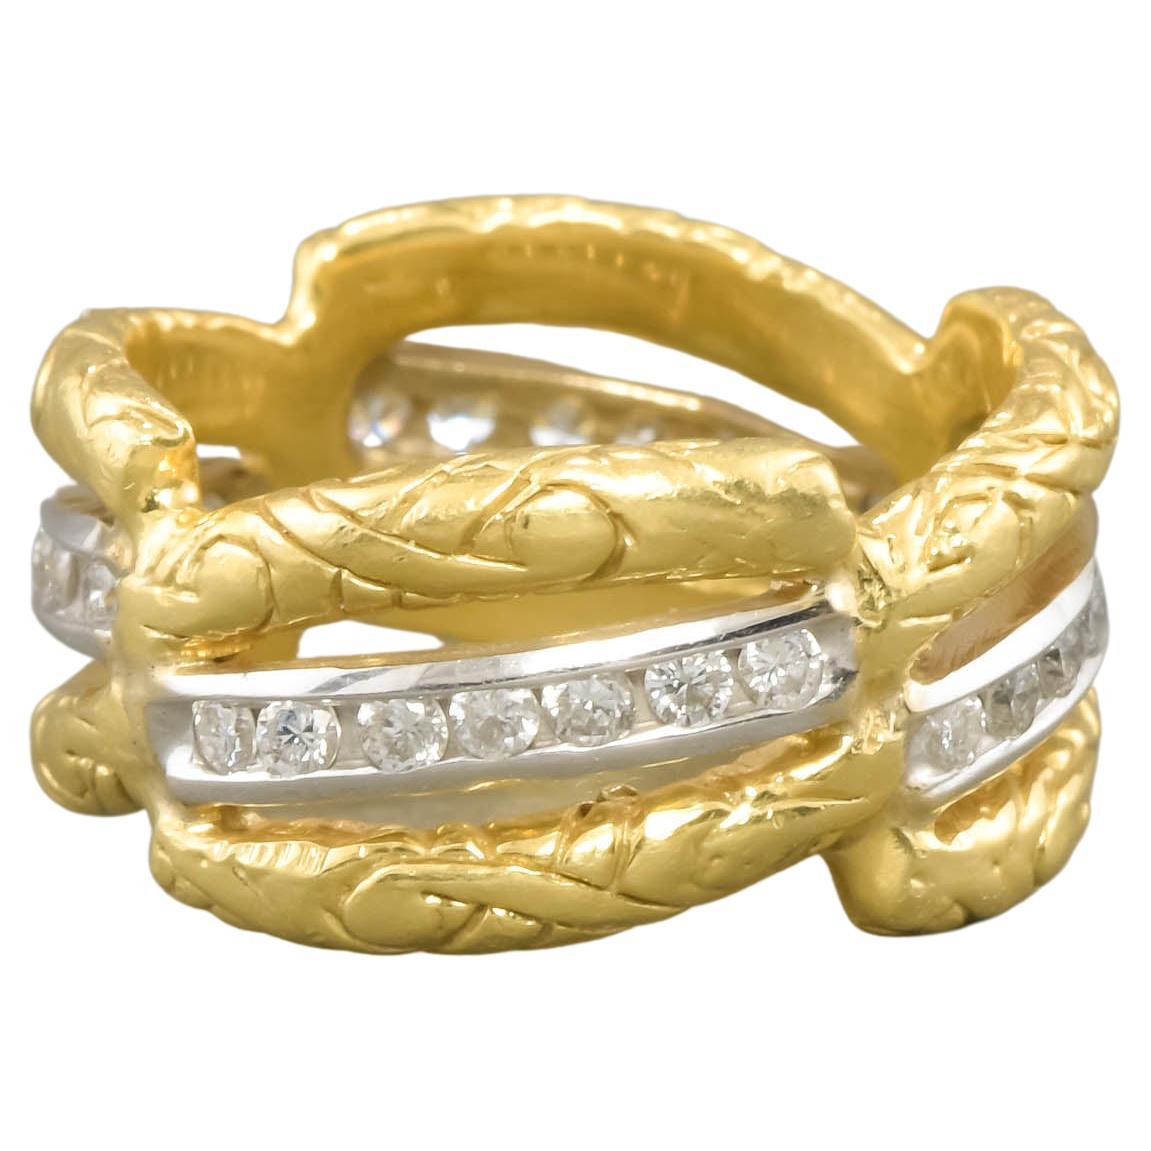 Substantial 18K Gold Diamond Eternity Band with Foliate Motif